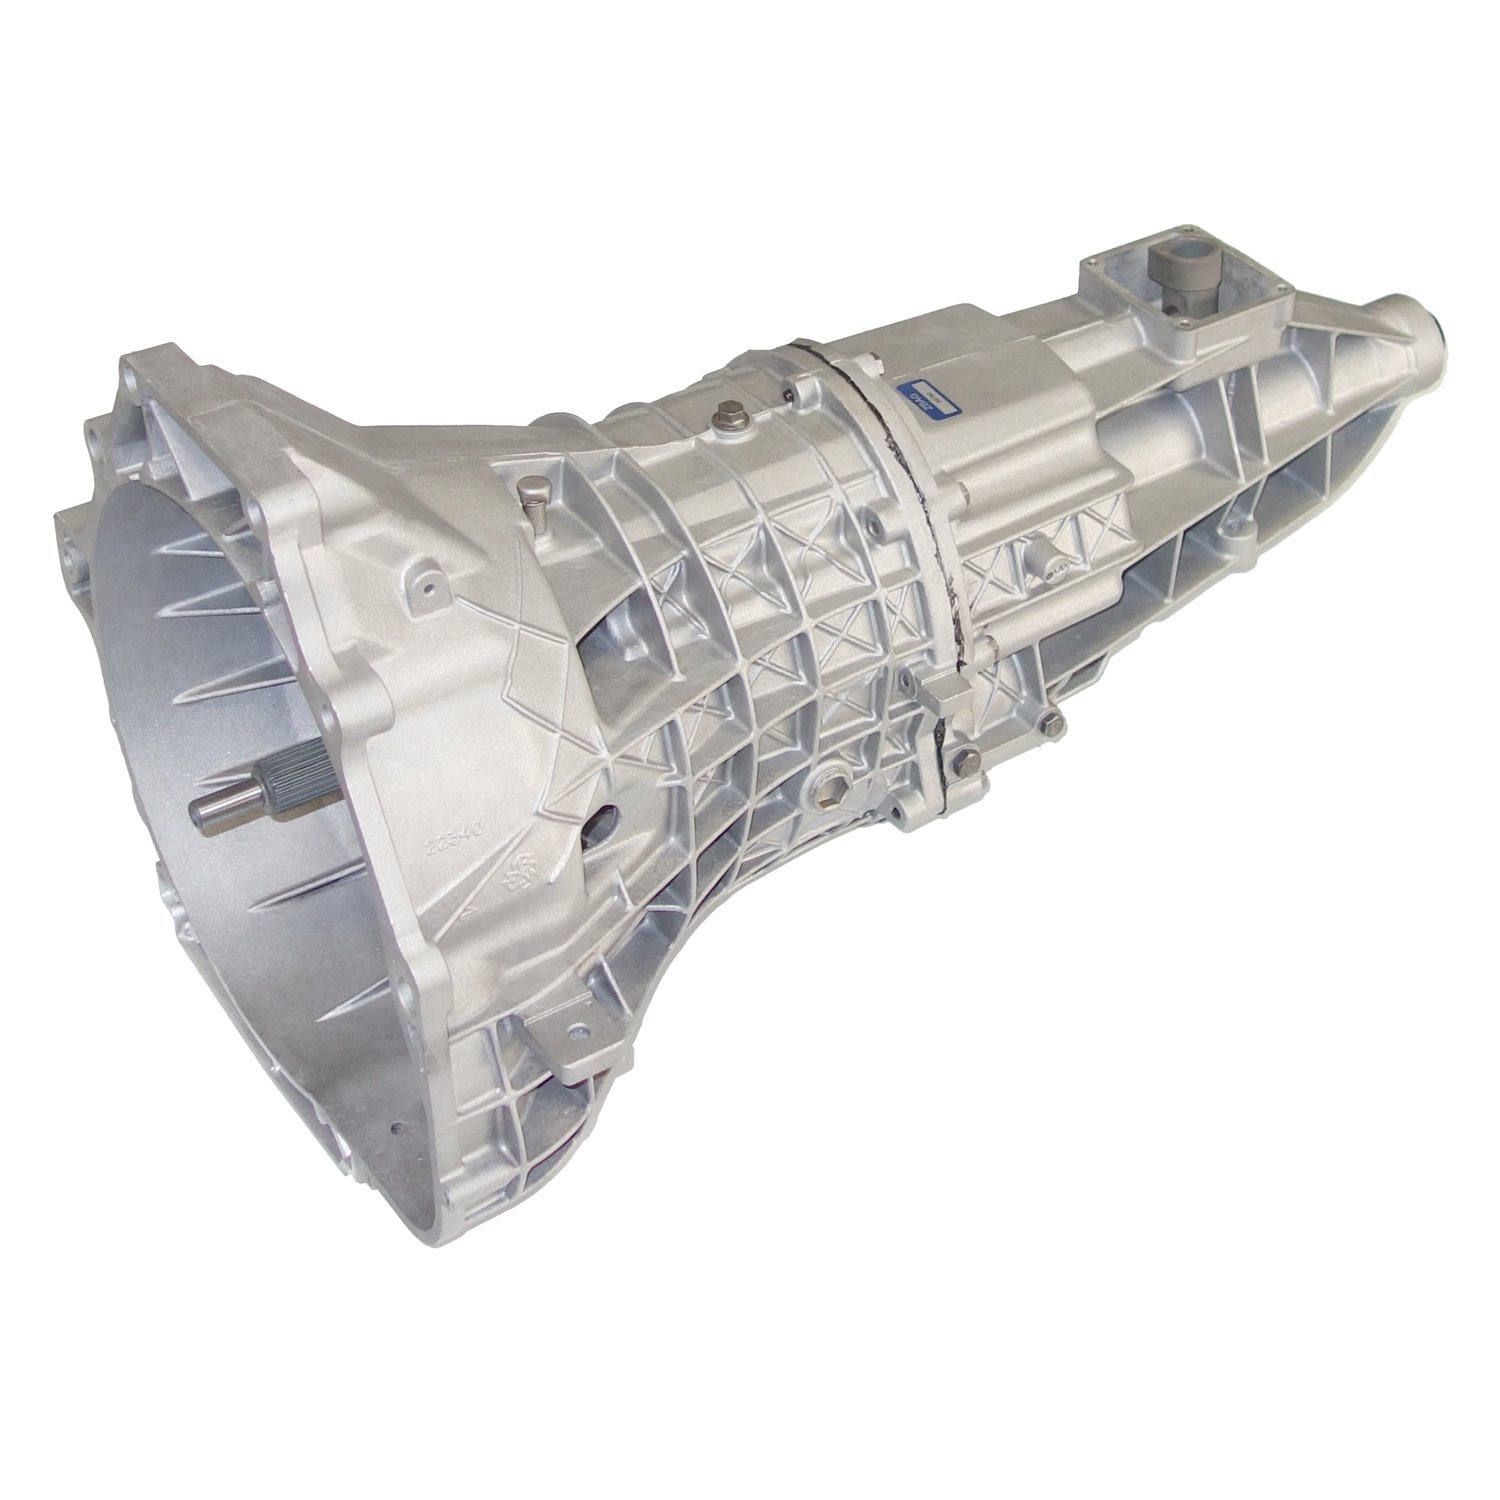 Remanufactured NV1500 Manual Transmission for Jeep 02-04 Liberty,